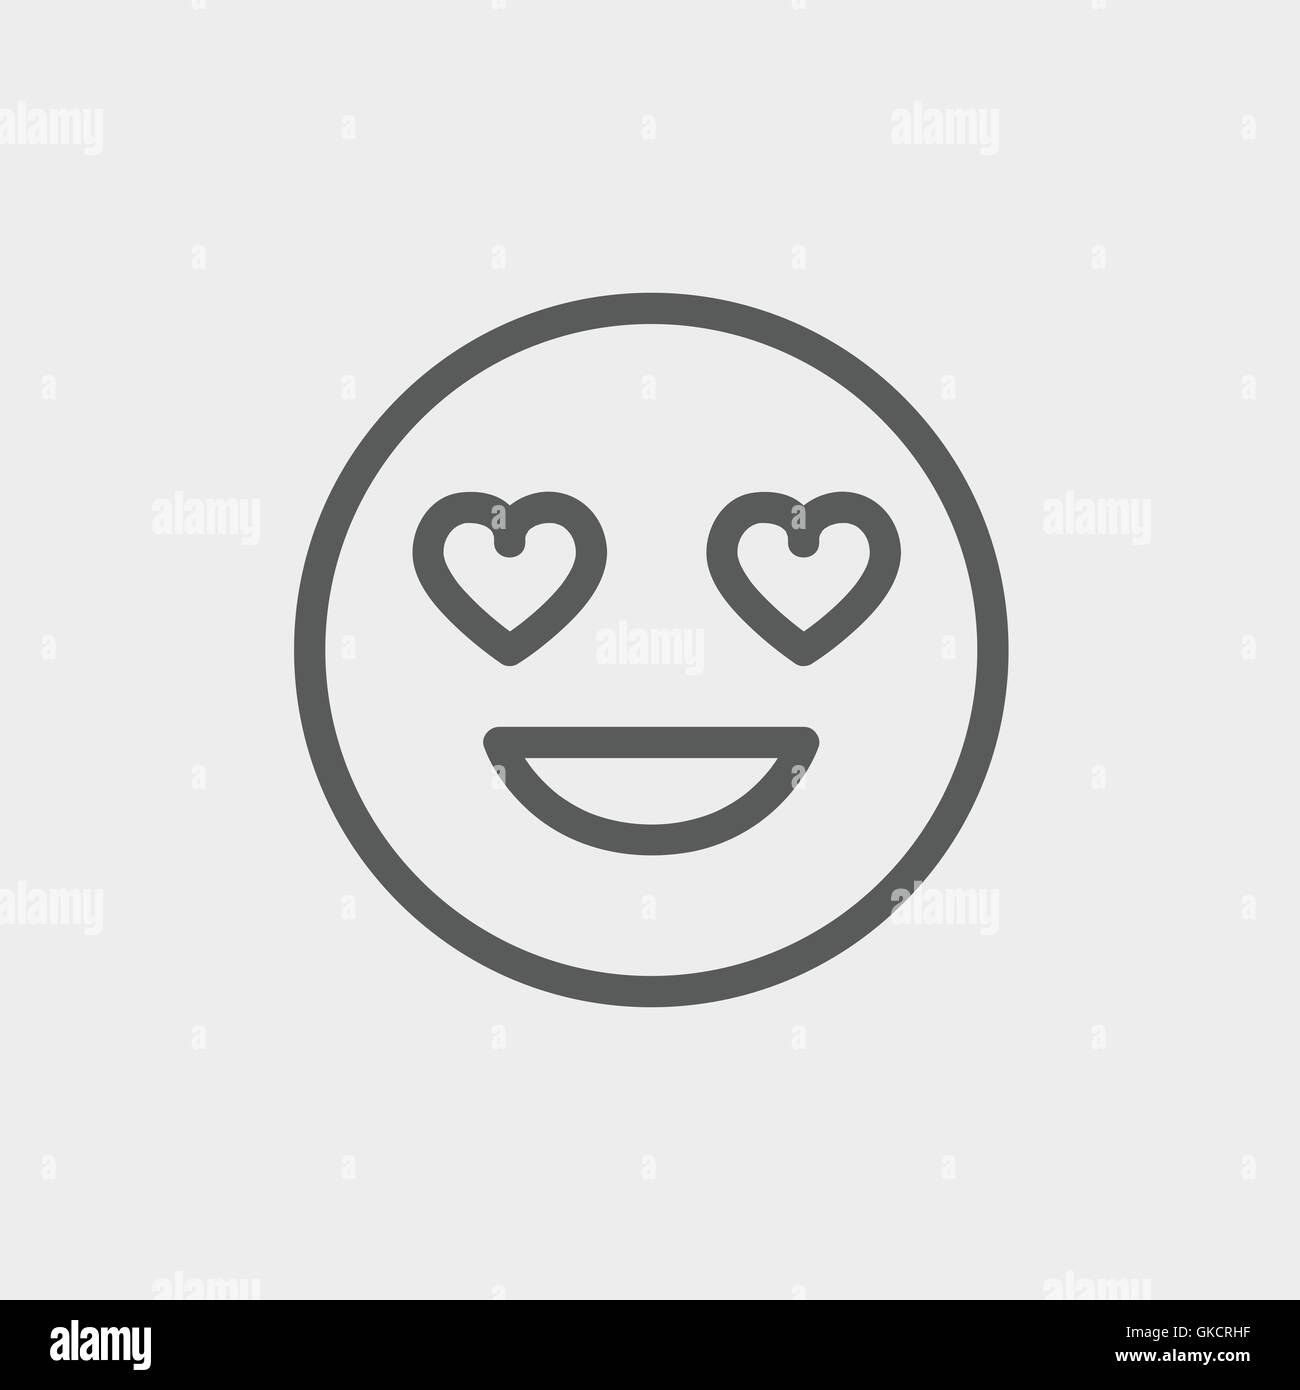 In love thin line icon Stock Vector